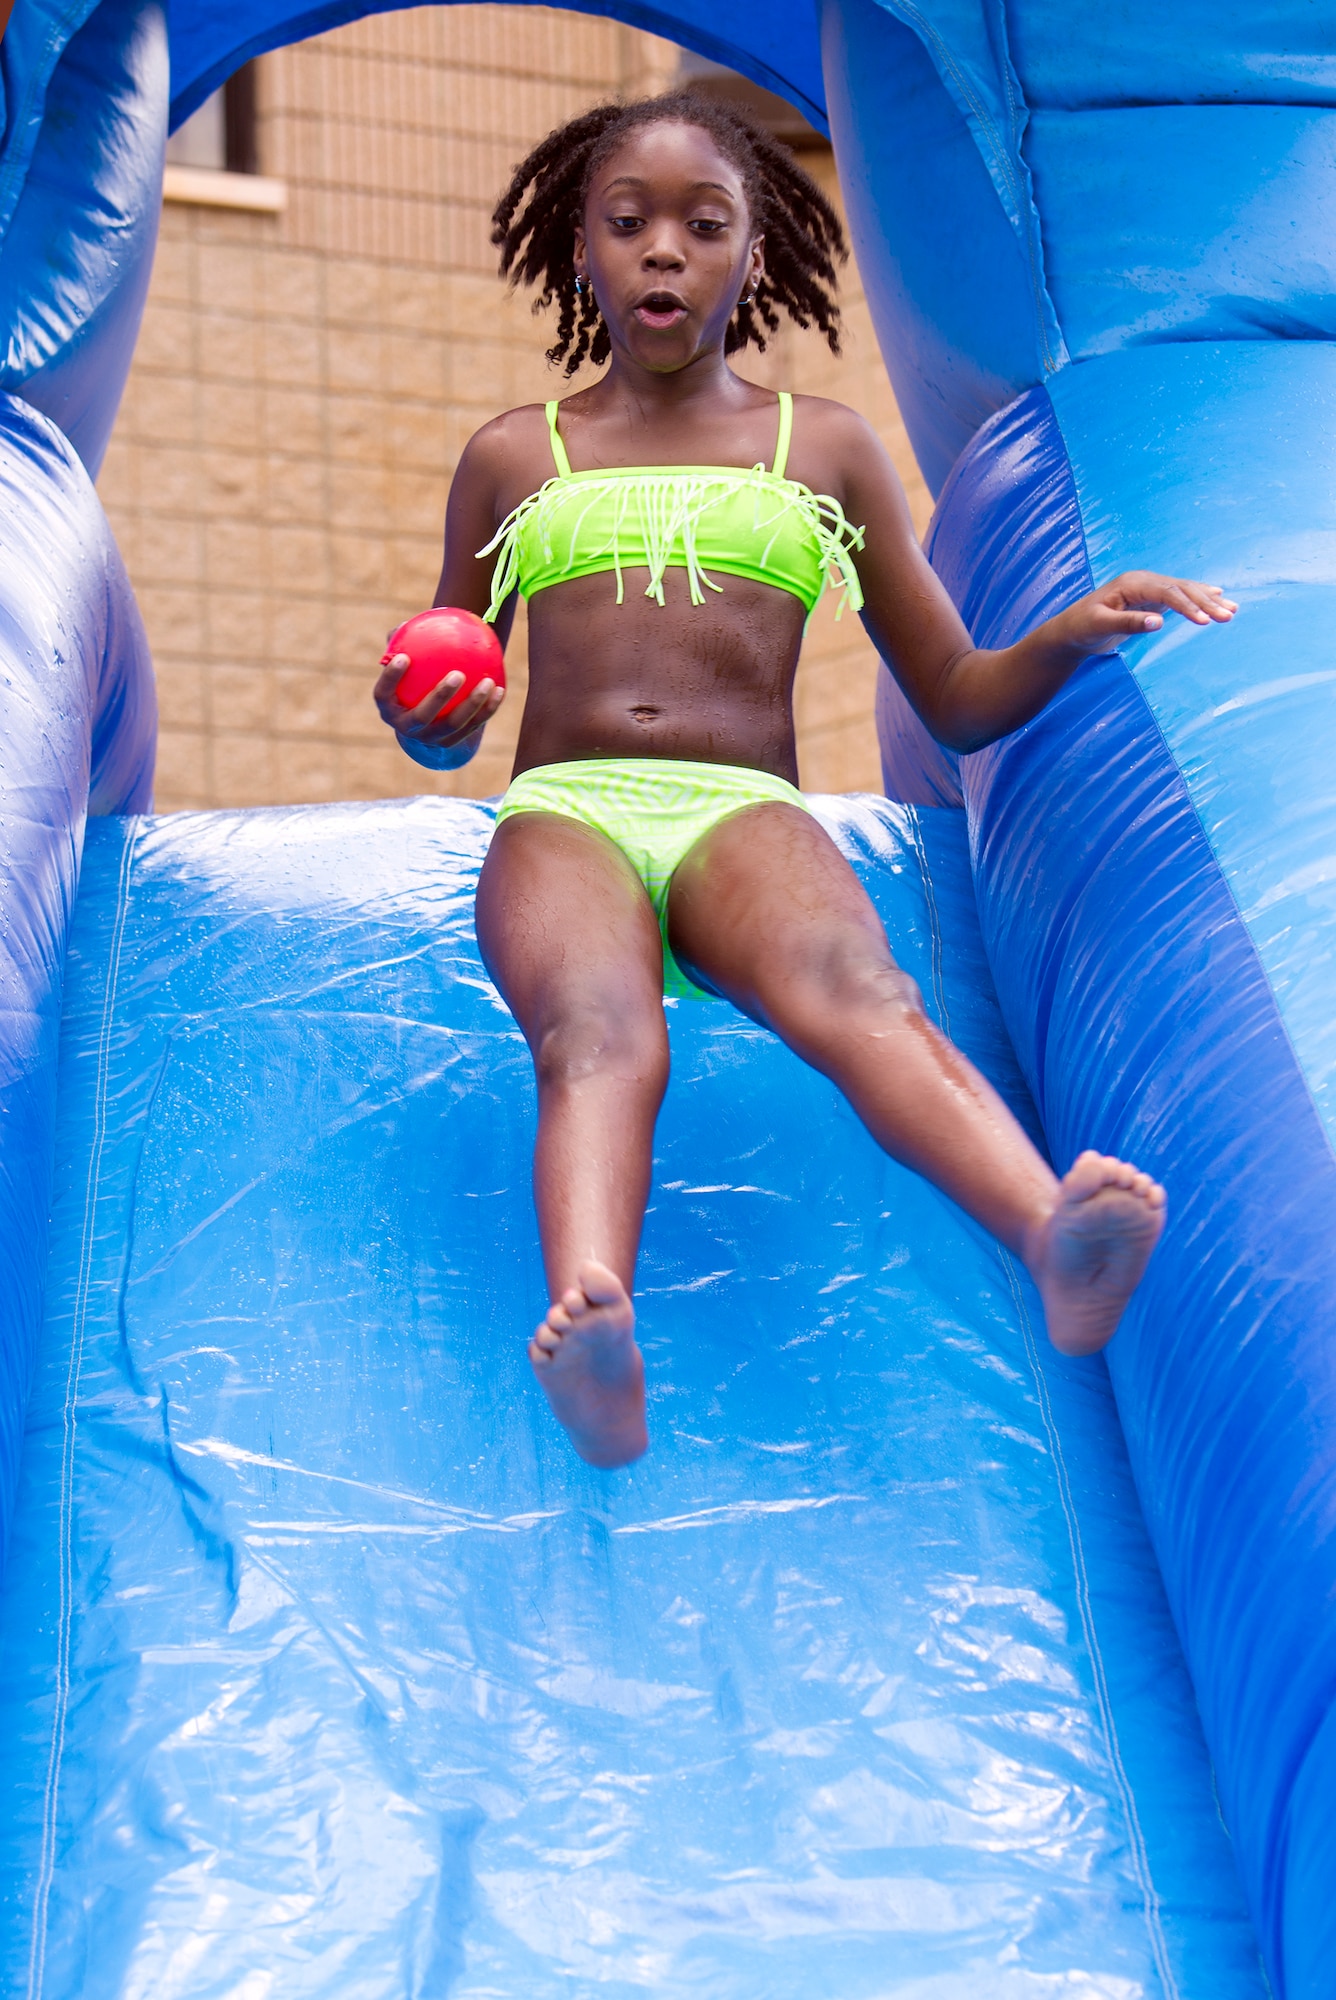 Naiya Wade, daughter of U.S. Air Force Tech. Sgt. Michaela Maximin, 23d Force Support Squadron, jumps onto a slip-and-slide bounce house during the July Jamboree, July 6, 2015, at Moody Air Force Base, Ga. The event provided outdoor activities for youth program participants to interact with other attendees and staff. (U.S. Air Force photo by Airman Greg Nash/Released)